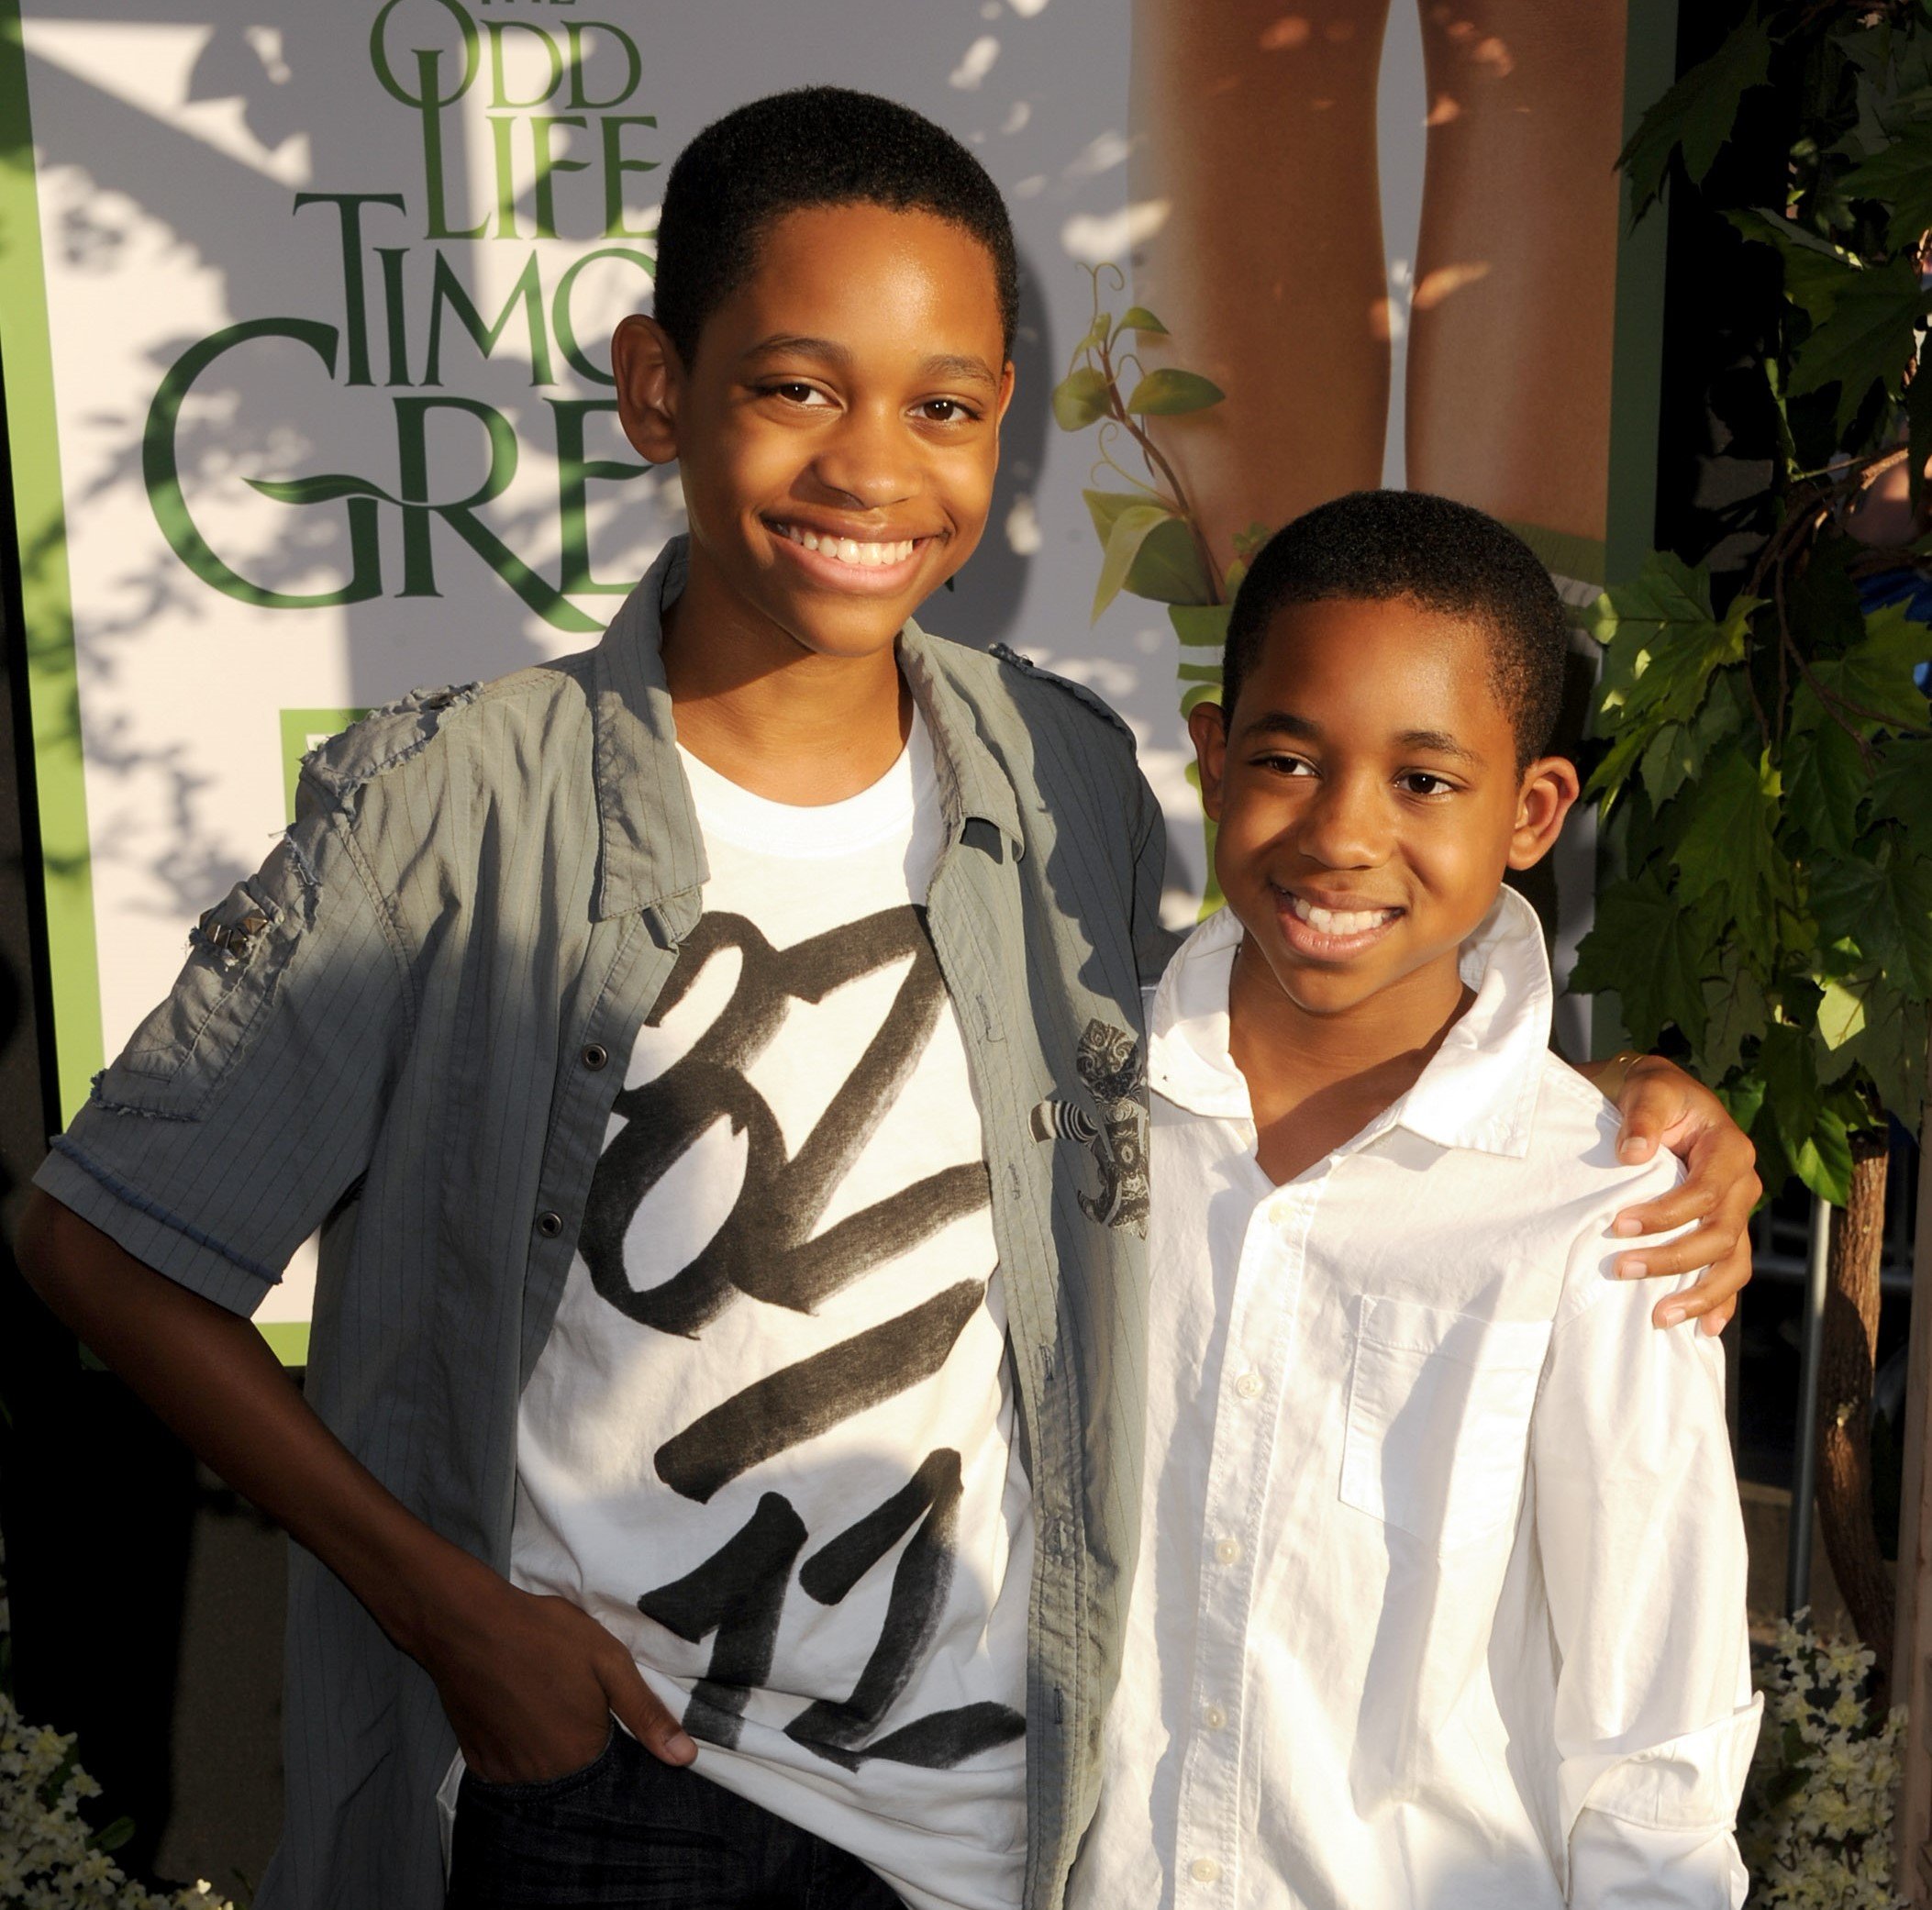  Tyrel Jackson Williams and brother Tylen Williamsat the premiere of Walt Disney Pictures' "The Odd Life of Timothy Green" in 2012, in Hollywood. | Source: Getty Images